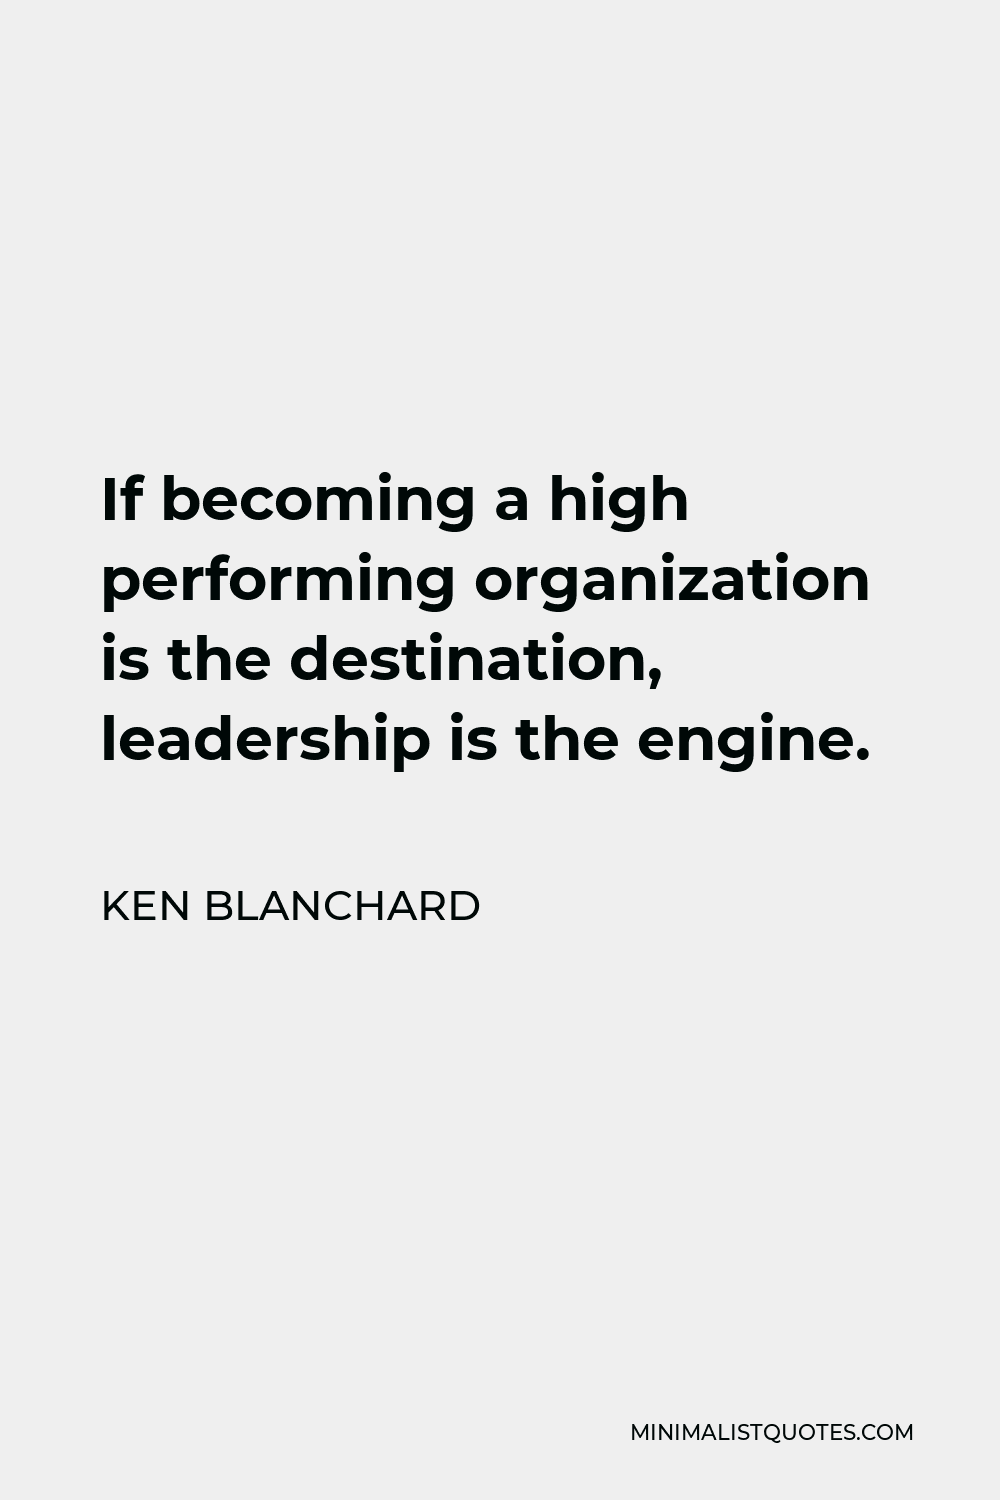 Ken Blanchard Quote - If becoming a high performing organization is the destination, leadership is the engine.